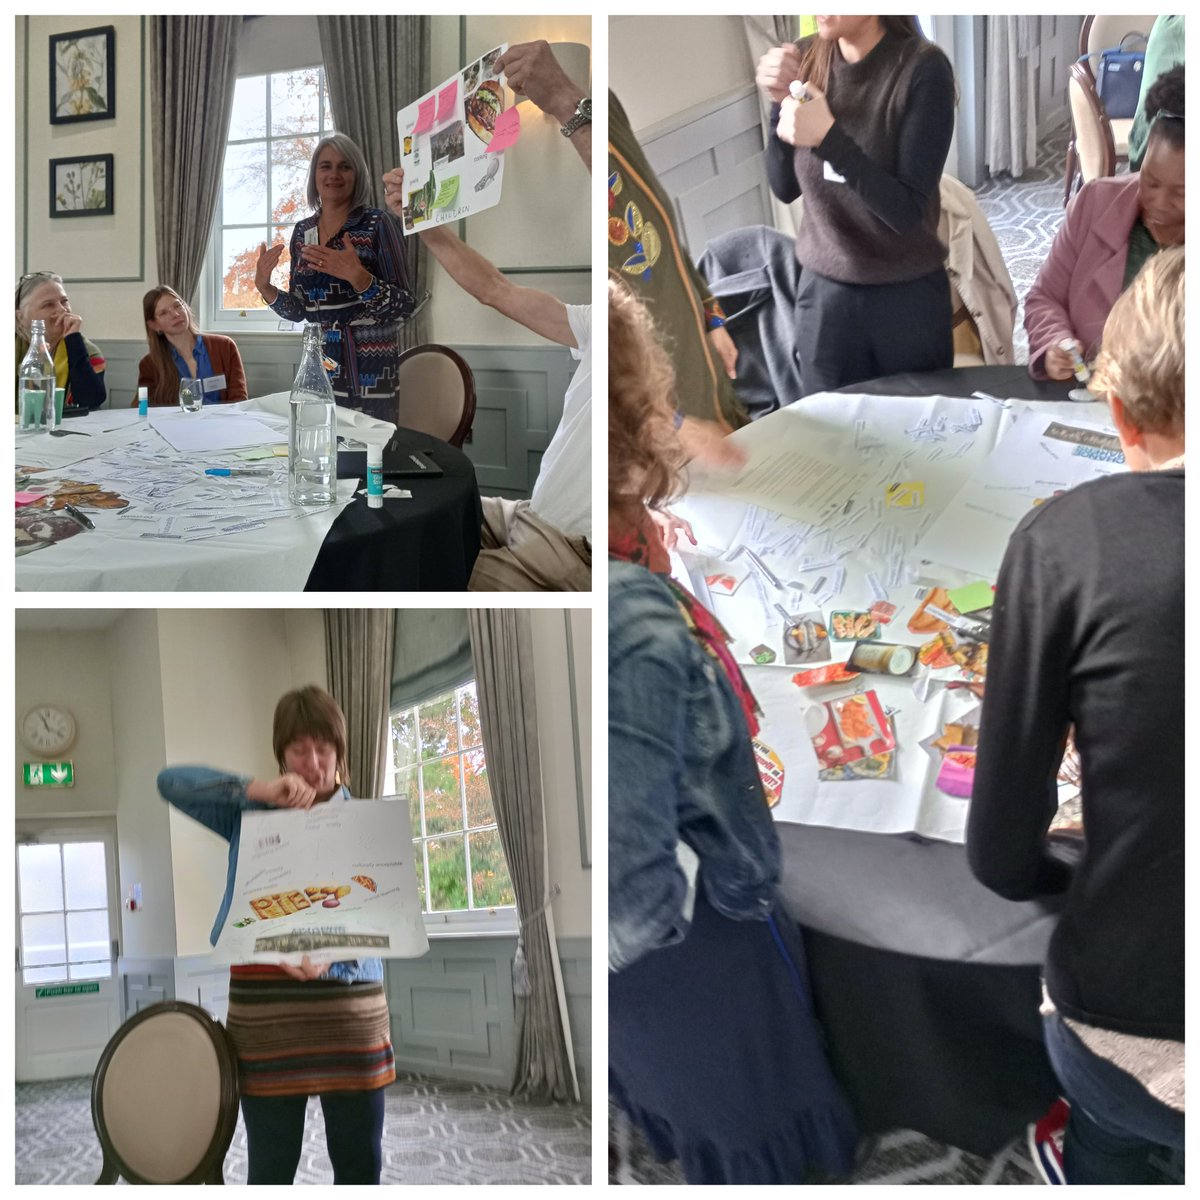 Such fun today #TUKFS day2 exploring #creative #methods 'visioning for a better #foodsystem ' with collaborative input from @BeanMealsUK @foodsequal @EqualityFood @nshaw18 @trishab116 & others....👌😍 Inspired now to consider #action #impact #disruption #process #transformation